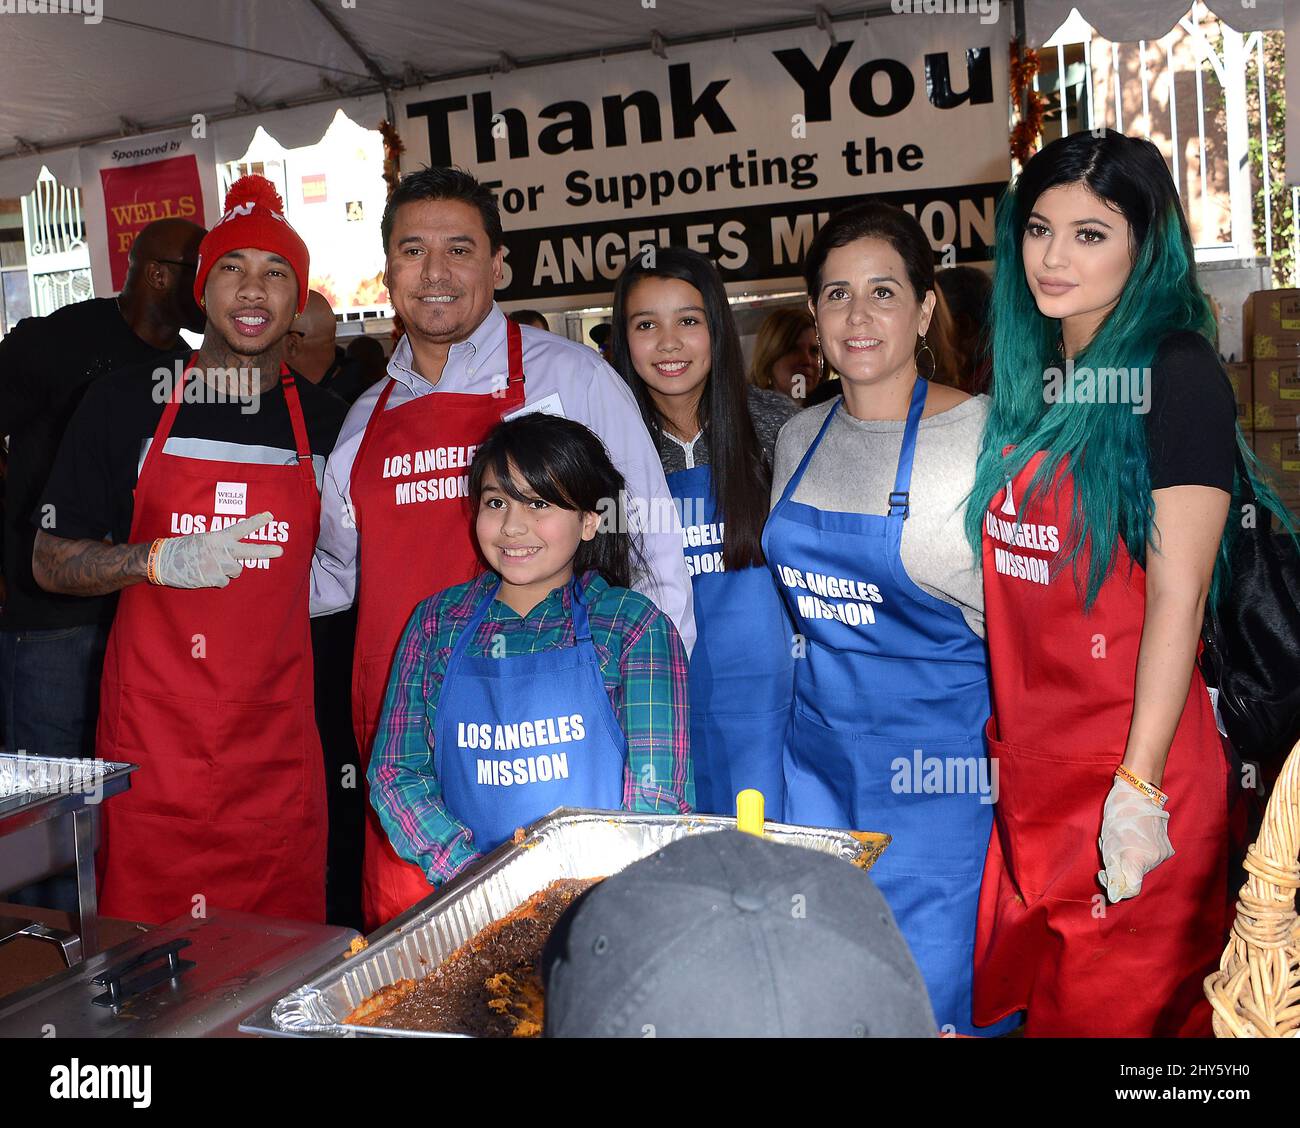 Kylie Jenner, Tyga during the Los Angeles Mission Thanksgiving Meal For The Homeless, held at Los Angeles Mission Stock Photo